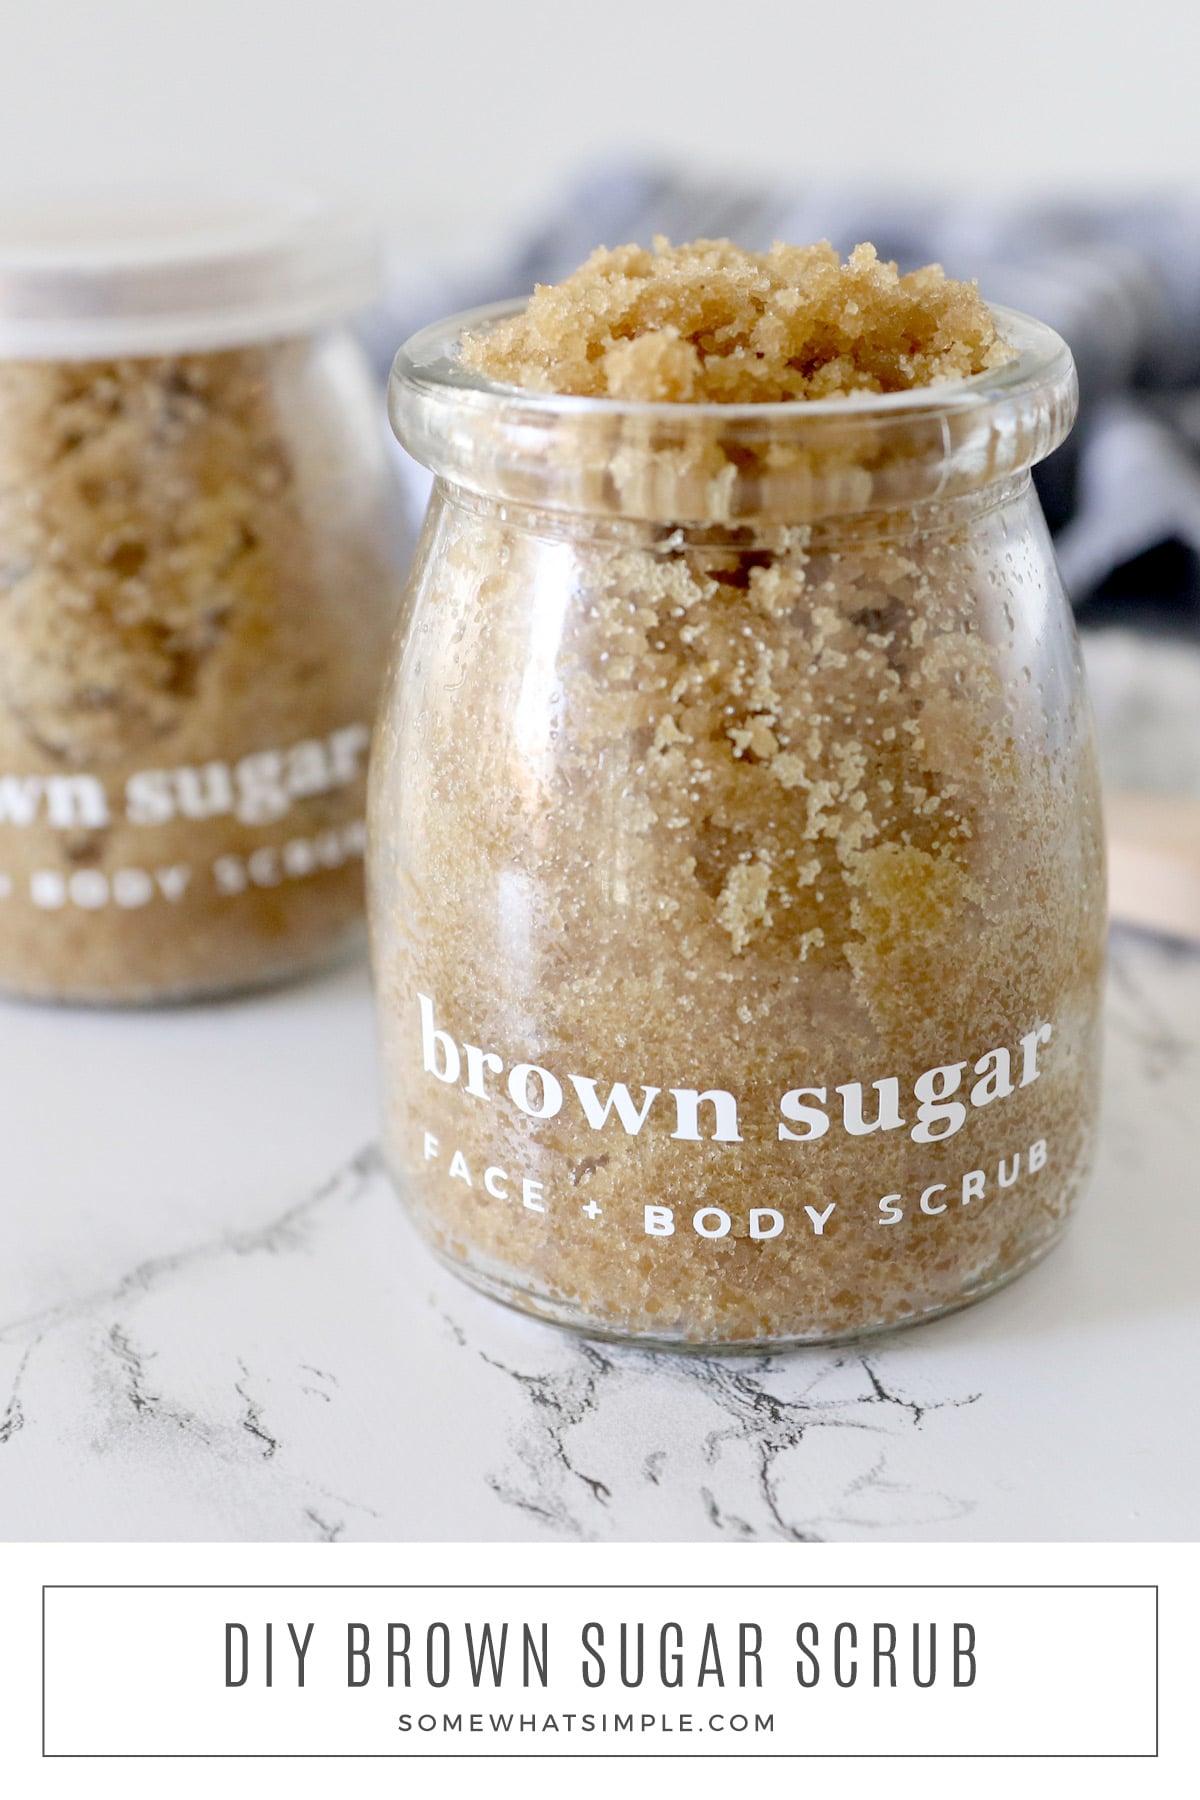 Homemade sugar scrubs are simple + useful gift ideas that are affordable too! Make a batch for your family and friends in less than 10 minutes! via @somewhatsimple